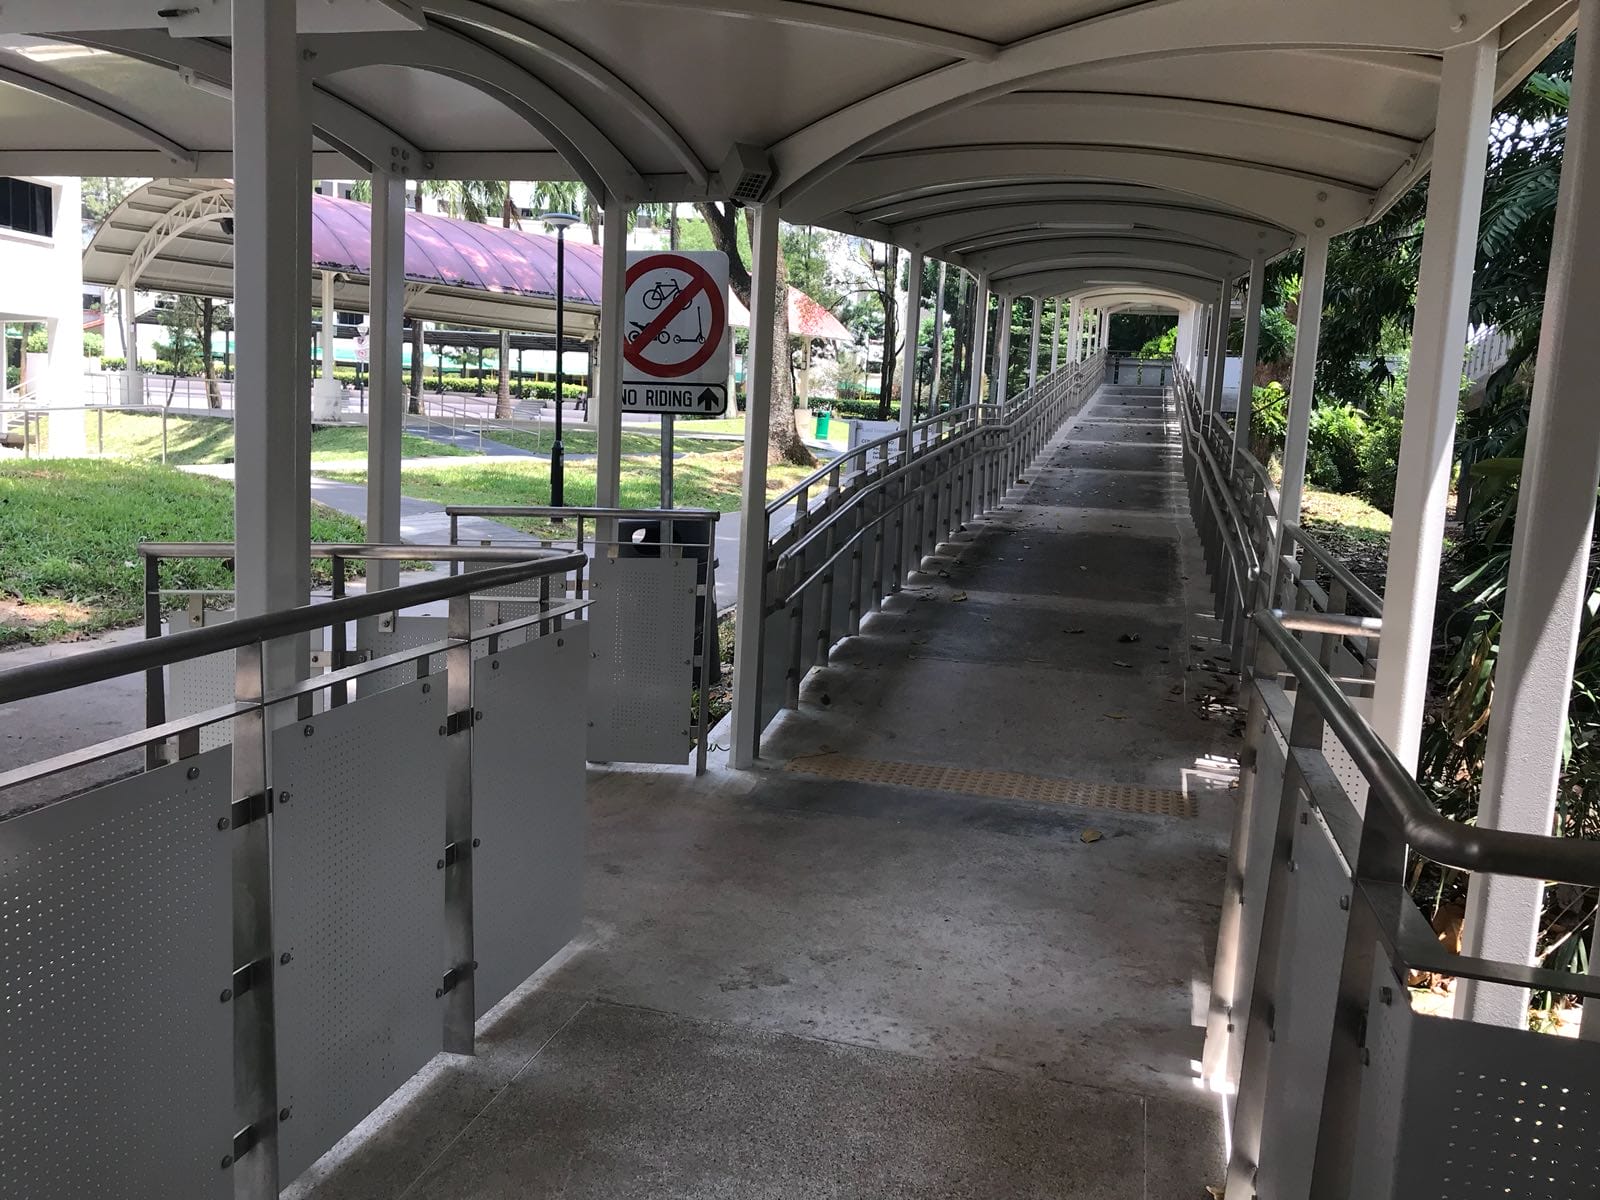 Sheltered walkway with durable stainless steel metal railing in Singapore developed by Brooklynz